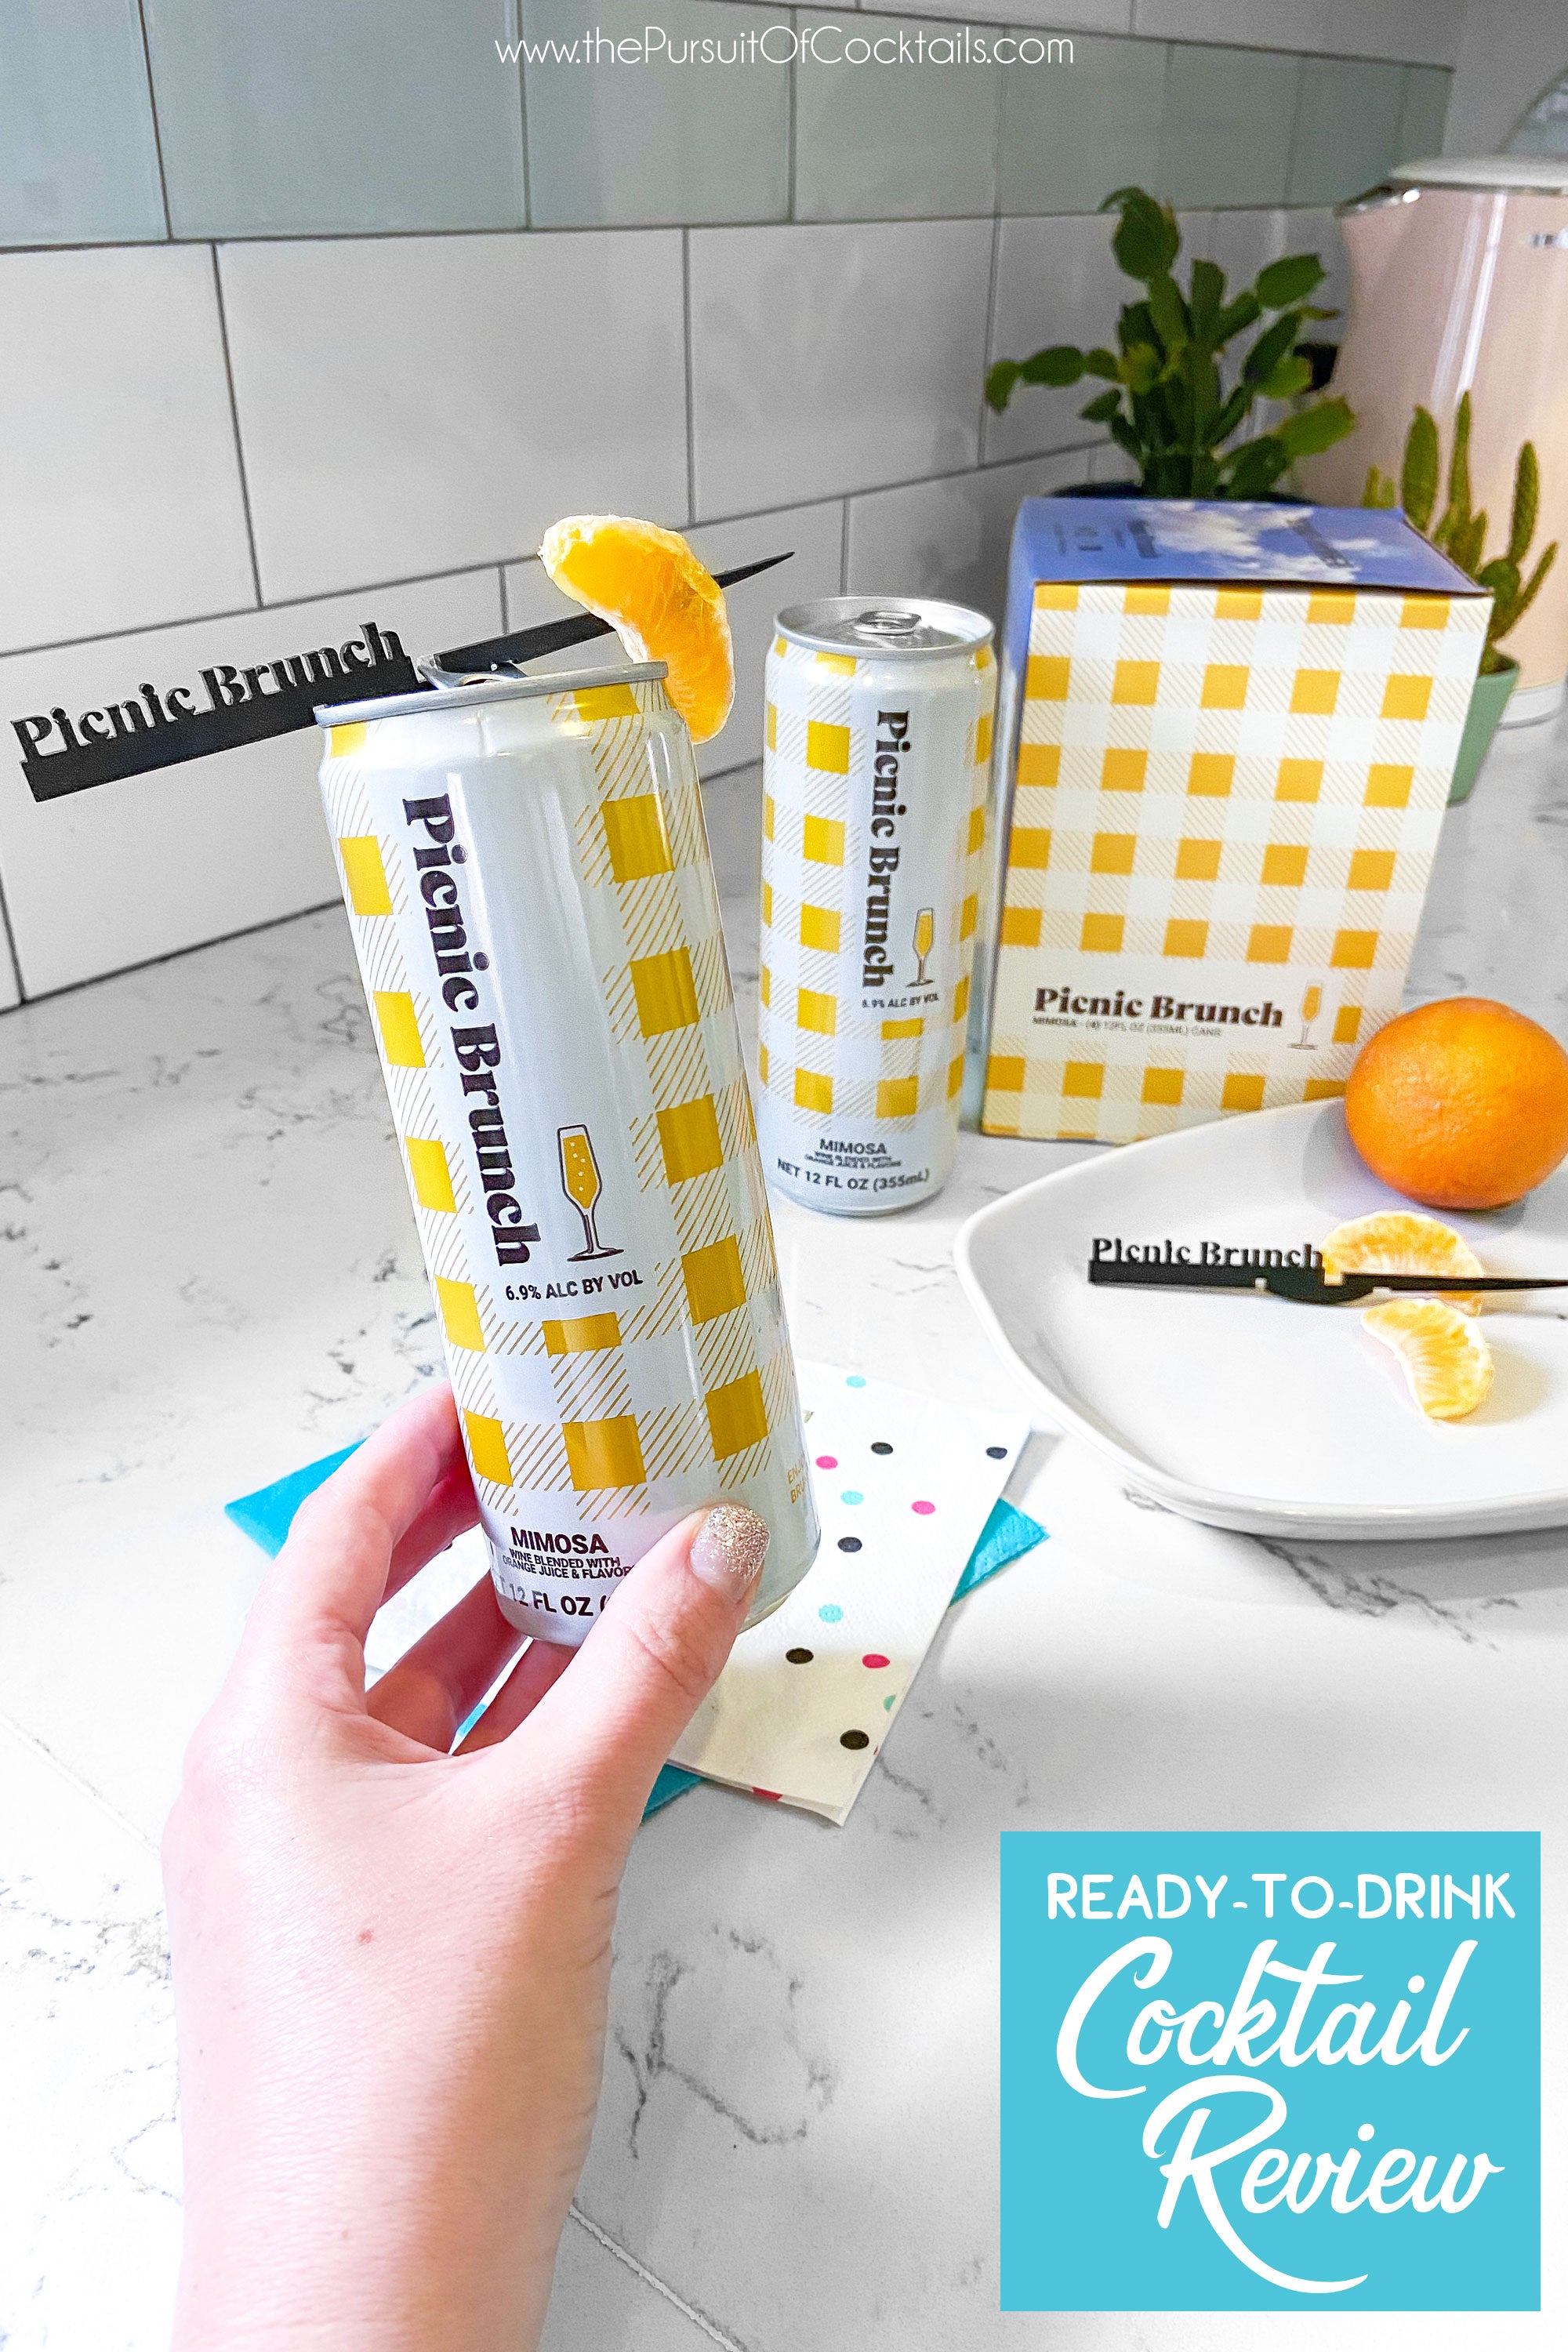 Picnic Brunch mimosa canned cocktail review by The Pursuit of Cocktails